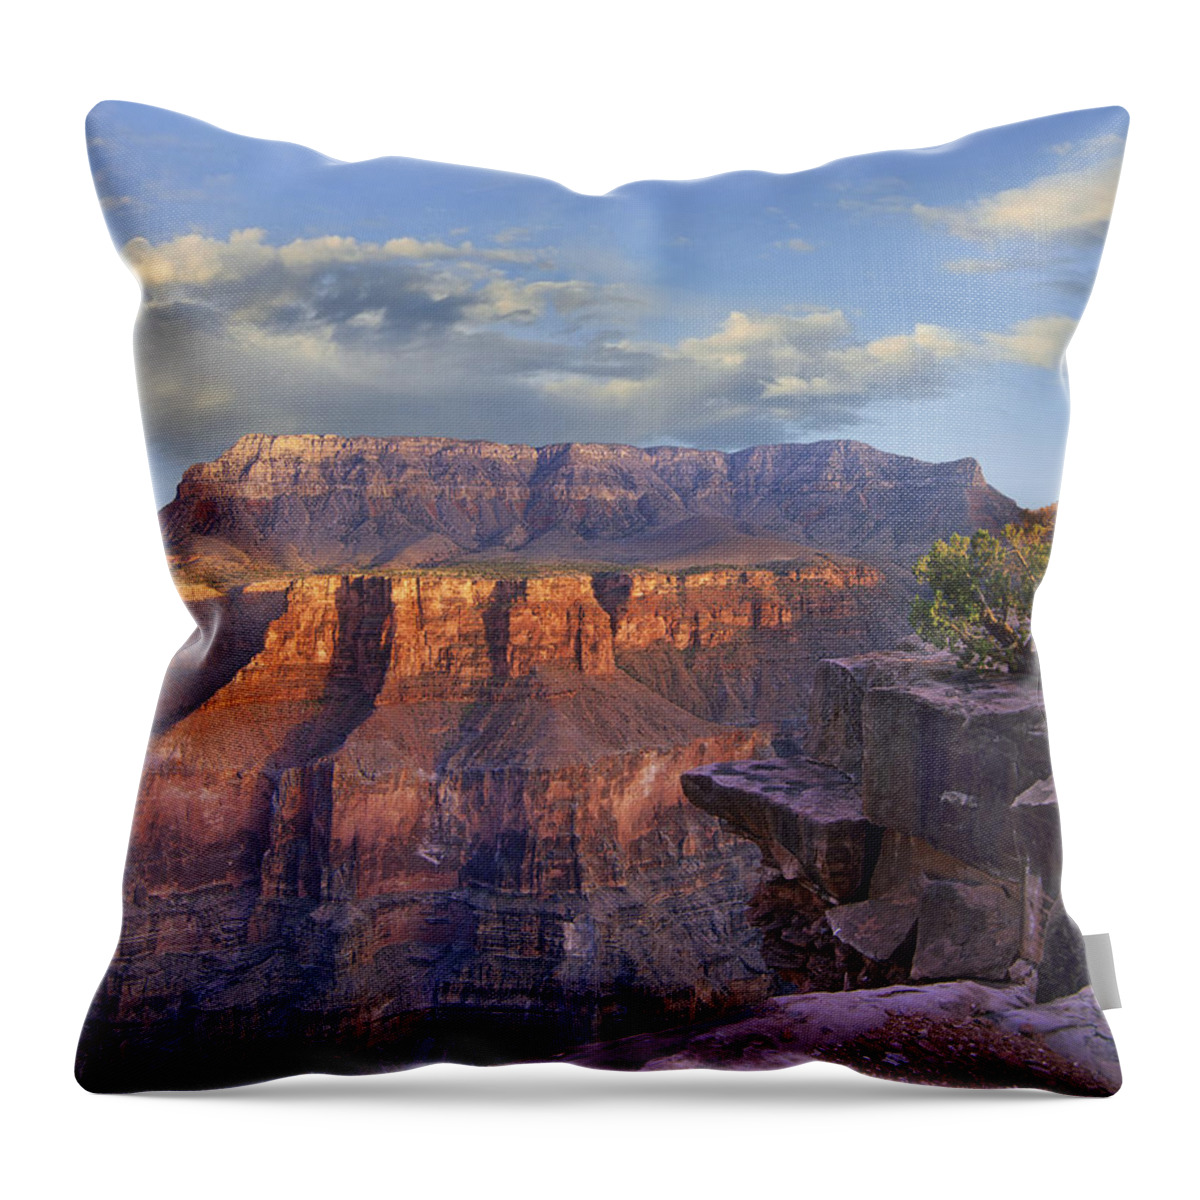 00176721 Throw Pillow featuring the photograph Sandstone Cliffs And Canyon Seen by Tim Fitzharris